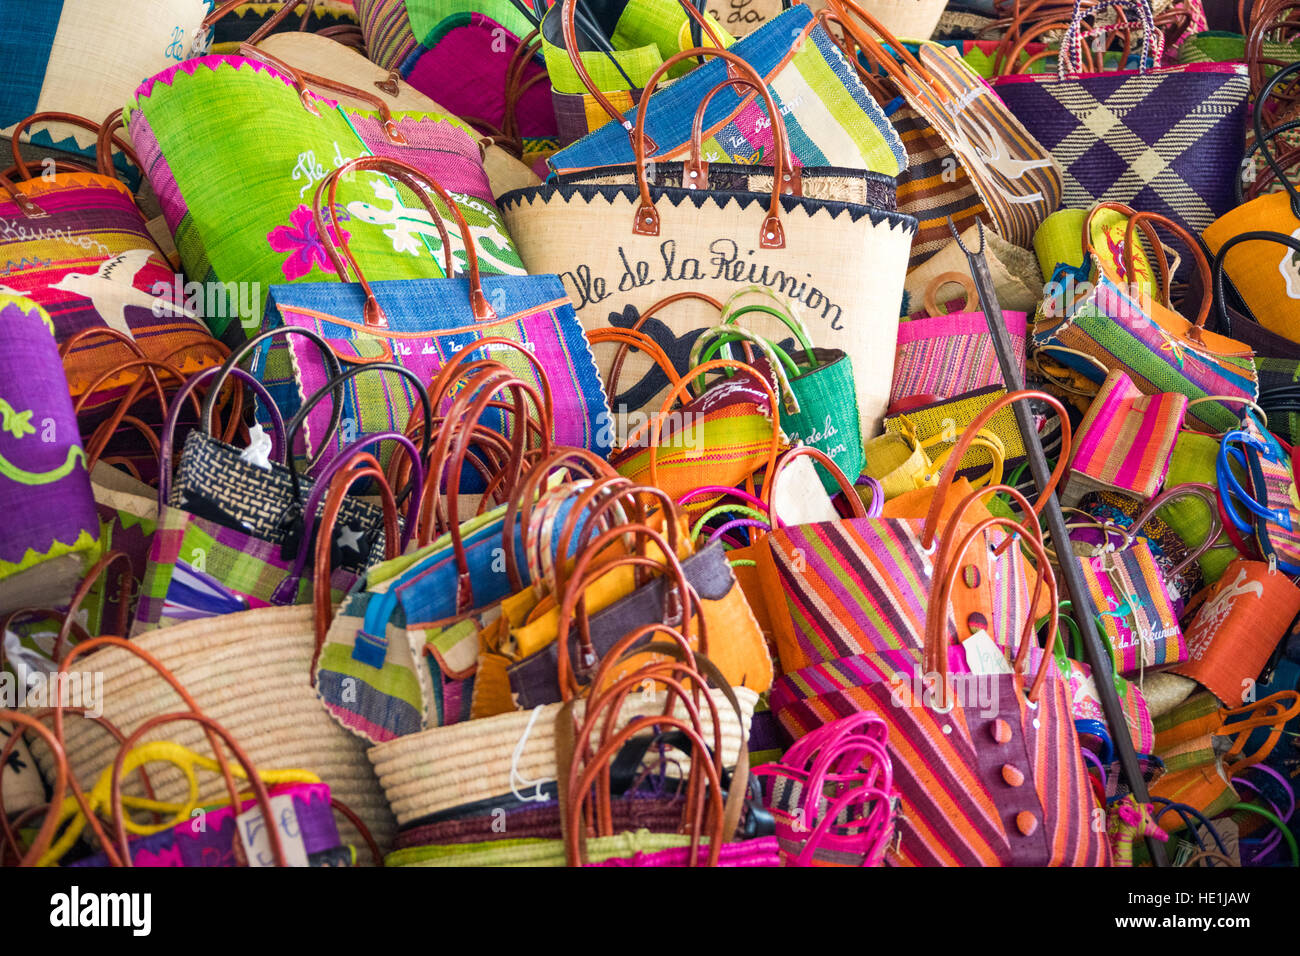 Local crafts at the covered market in St Pierre, Reunion Island Stock Photo